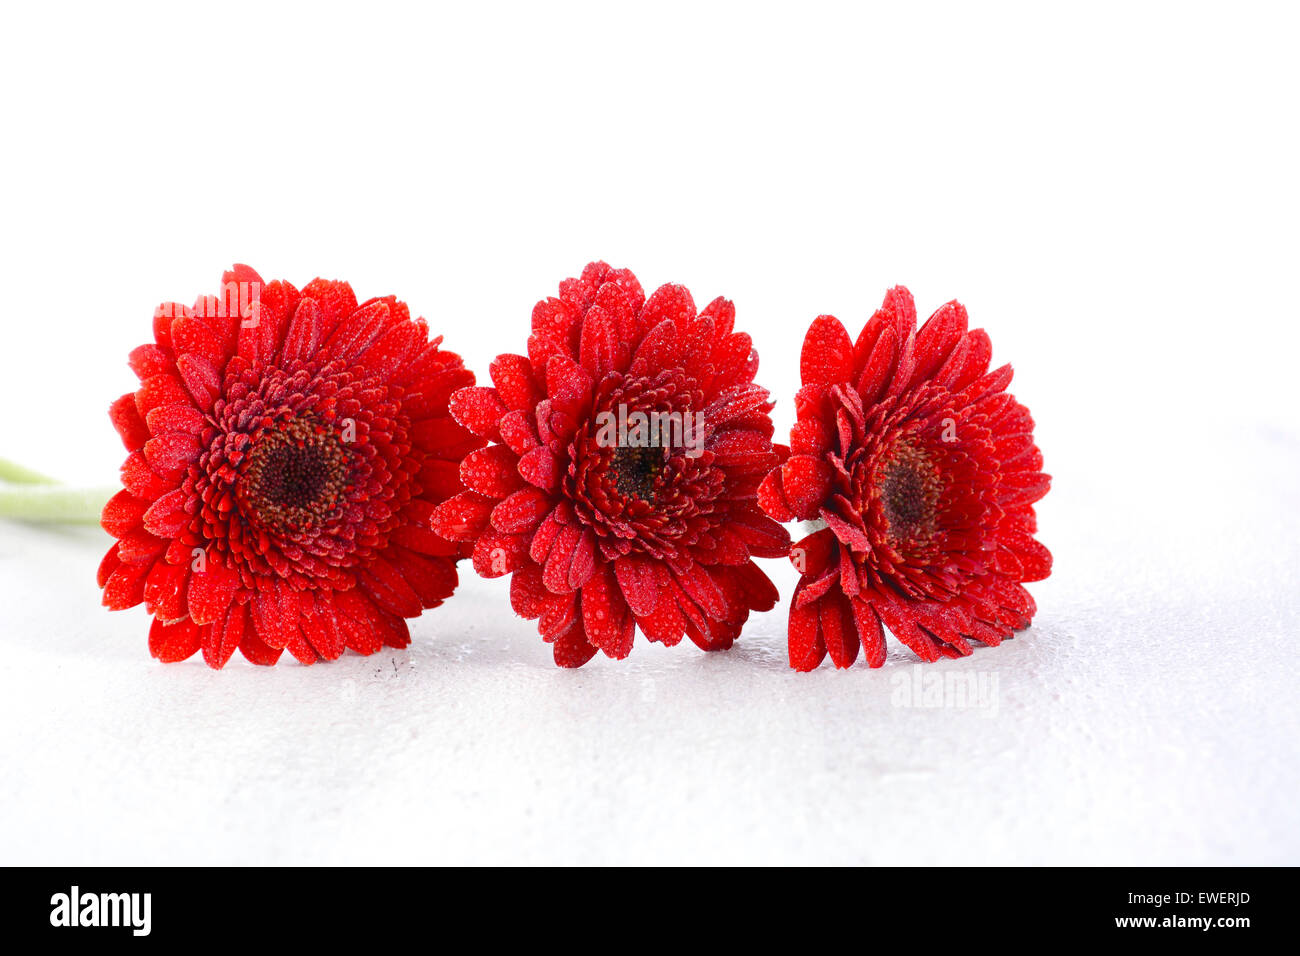 Bright red gerbera daisy flowers on rustic white shabby chic wood table. Stock Photo